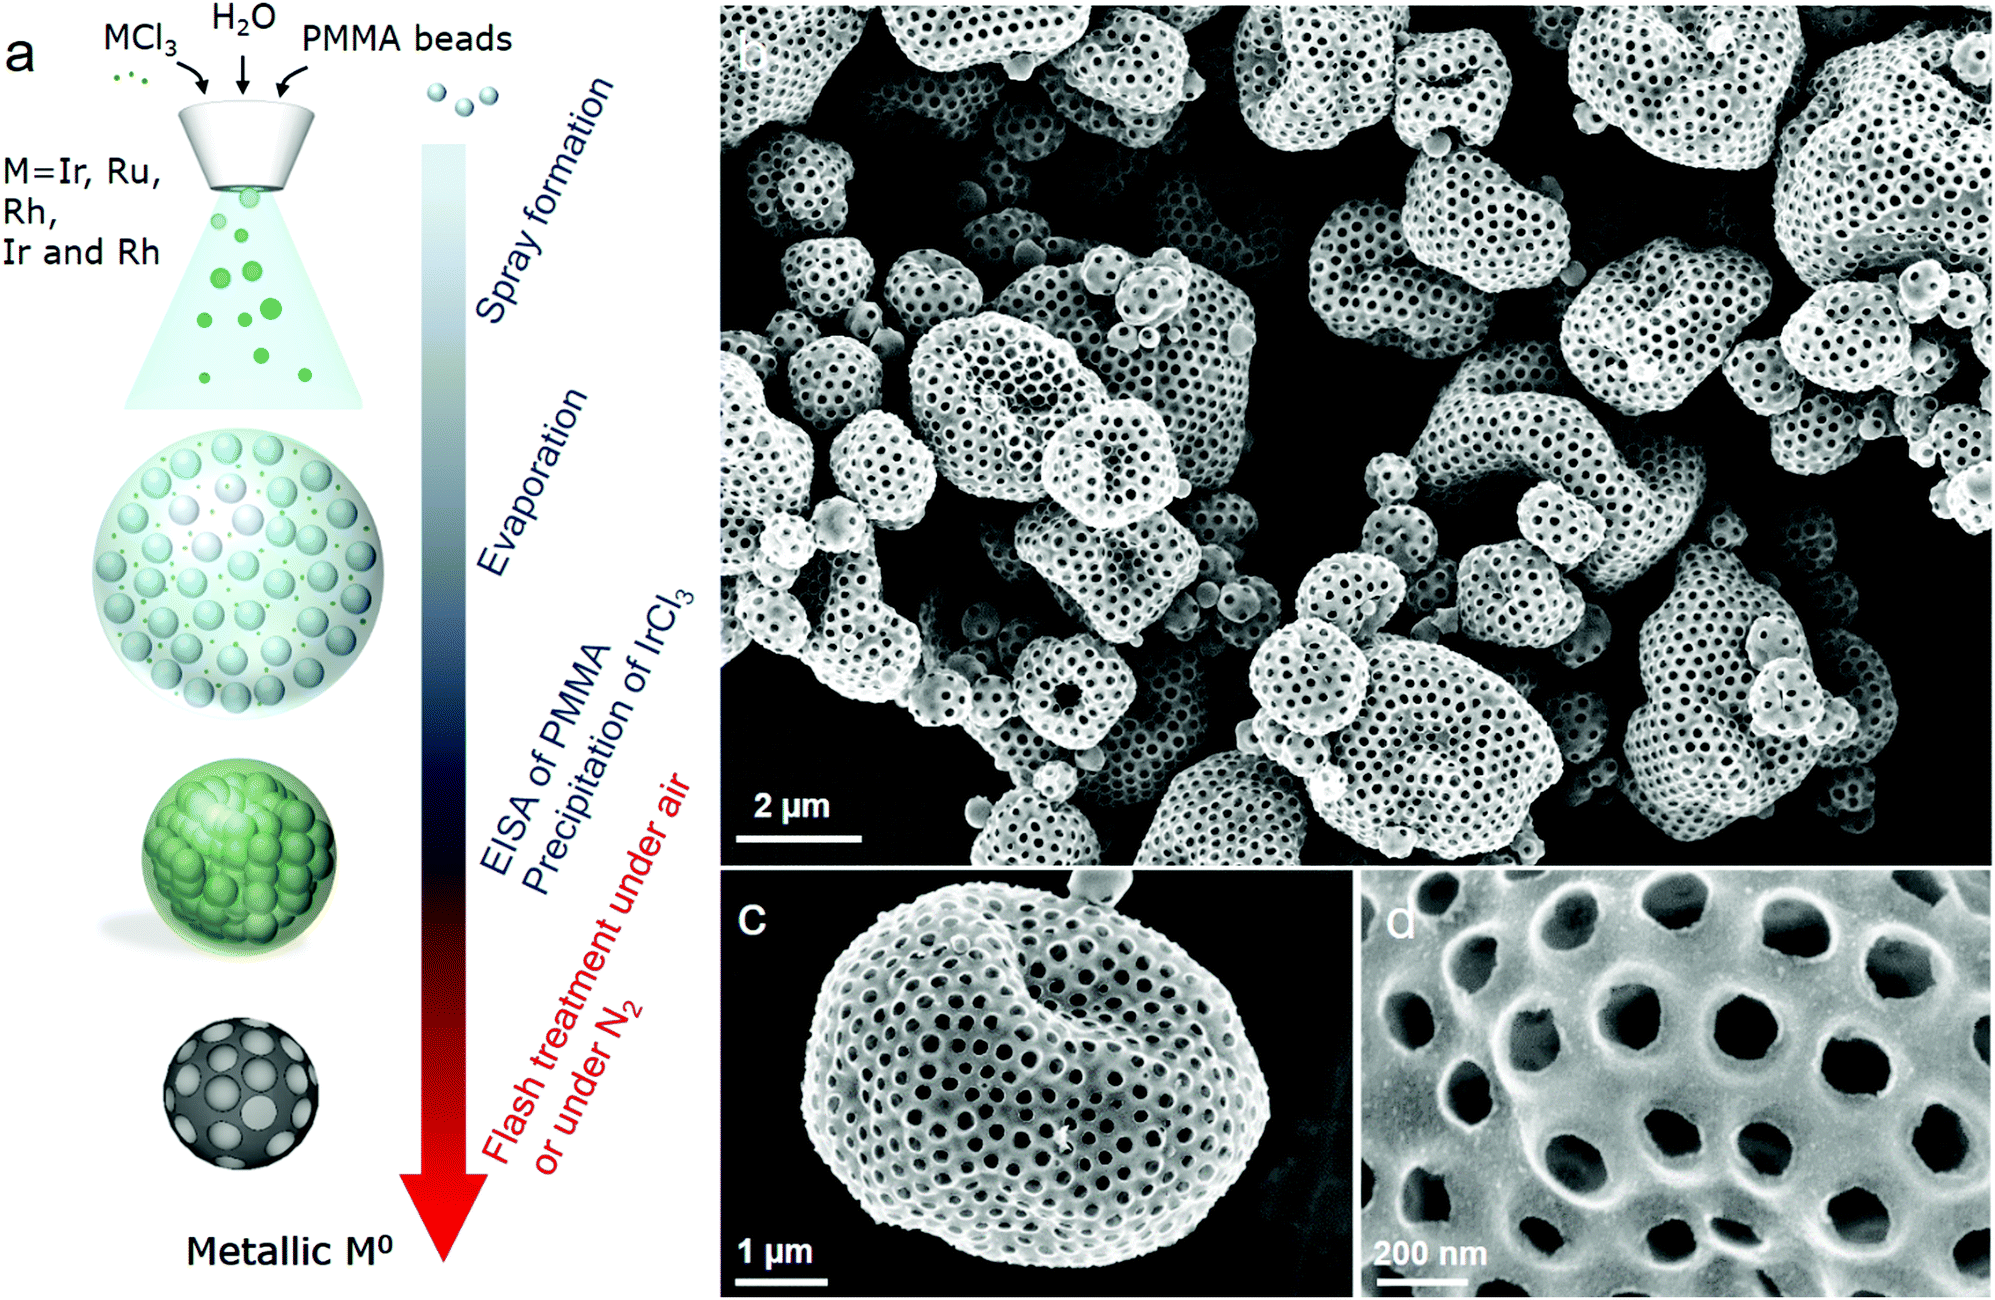 Aerosol synthesis of thermally stable porous noble metals and alloys by  using bi-functional templates - Materials Horizons (RSC Publishing)  DOI:10.1039/C9MH01408J